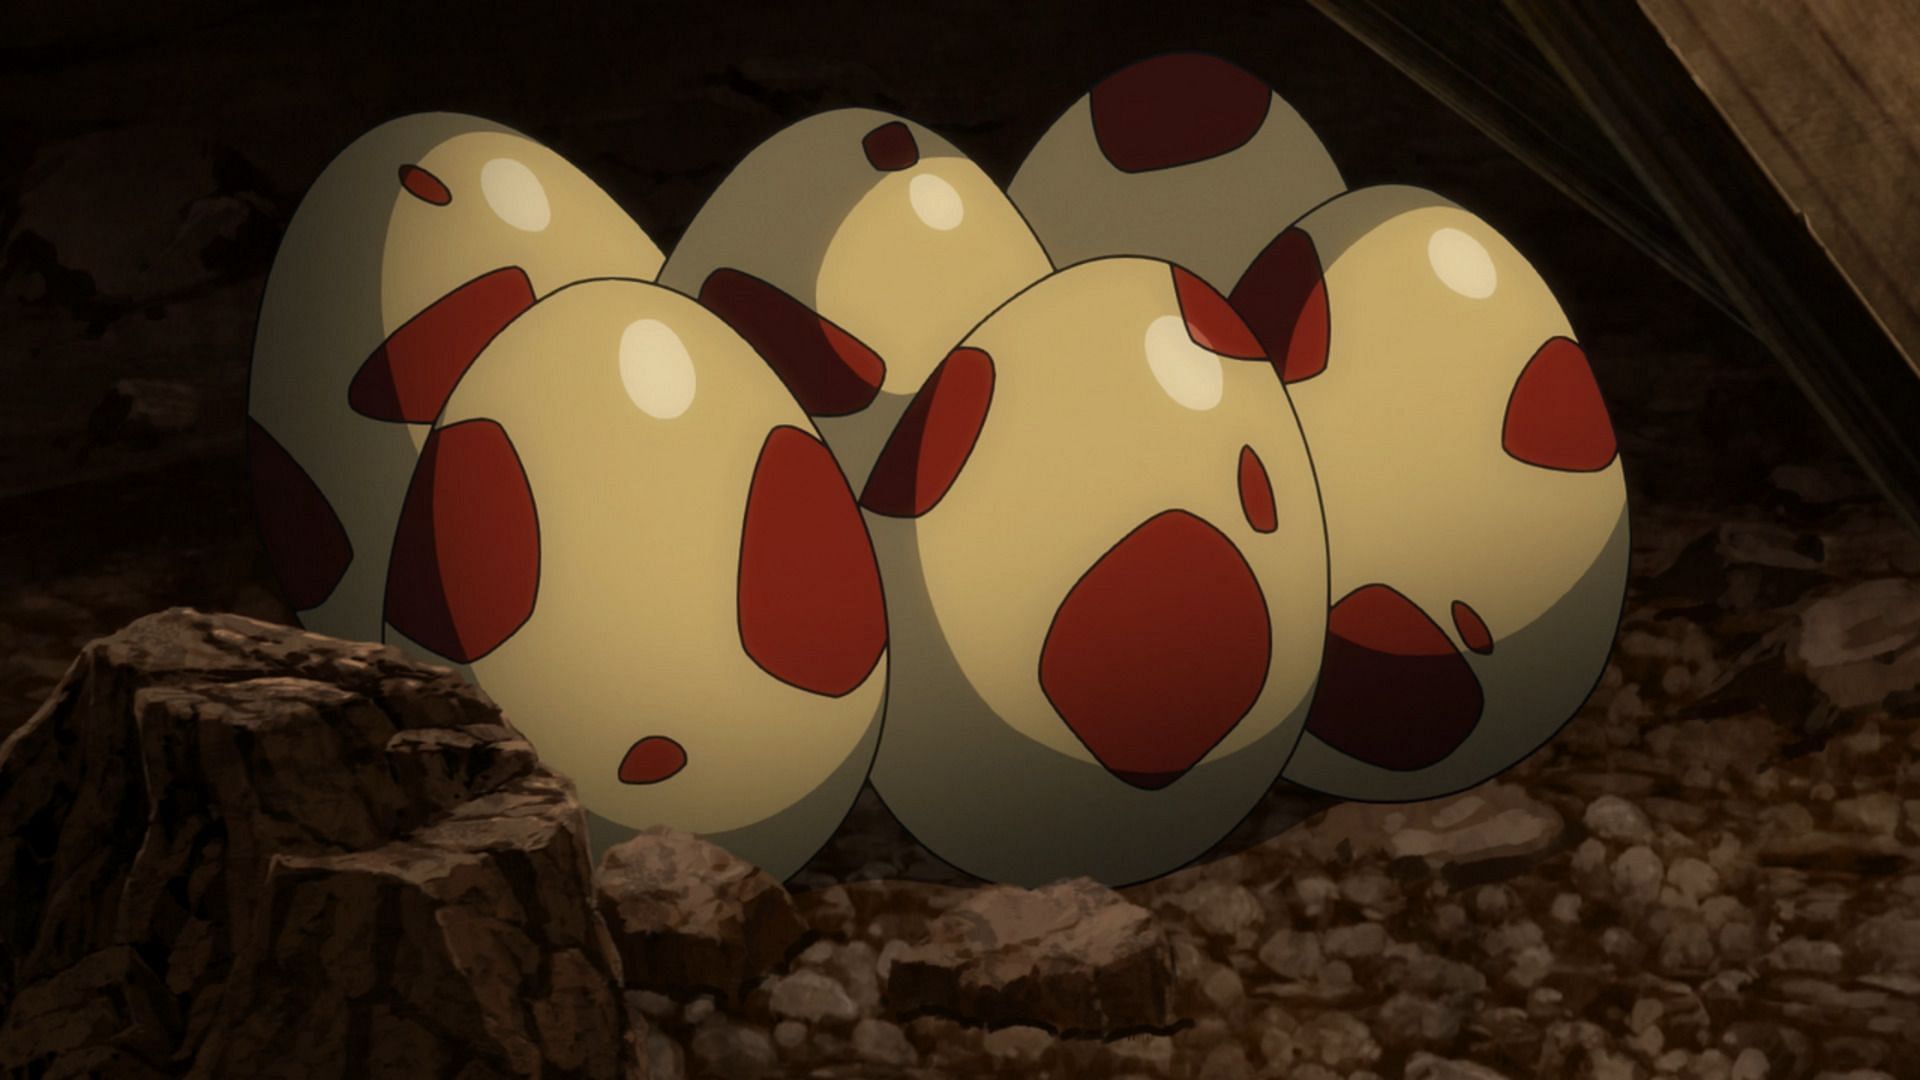 Pokemon Eggs as they appear in the anime (Image via The Pokemon Company)